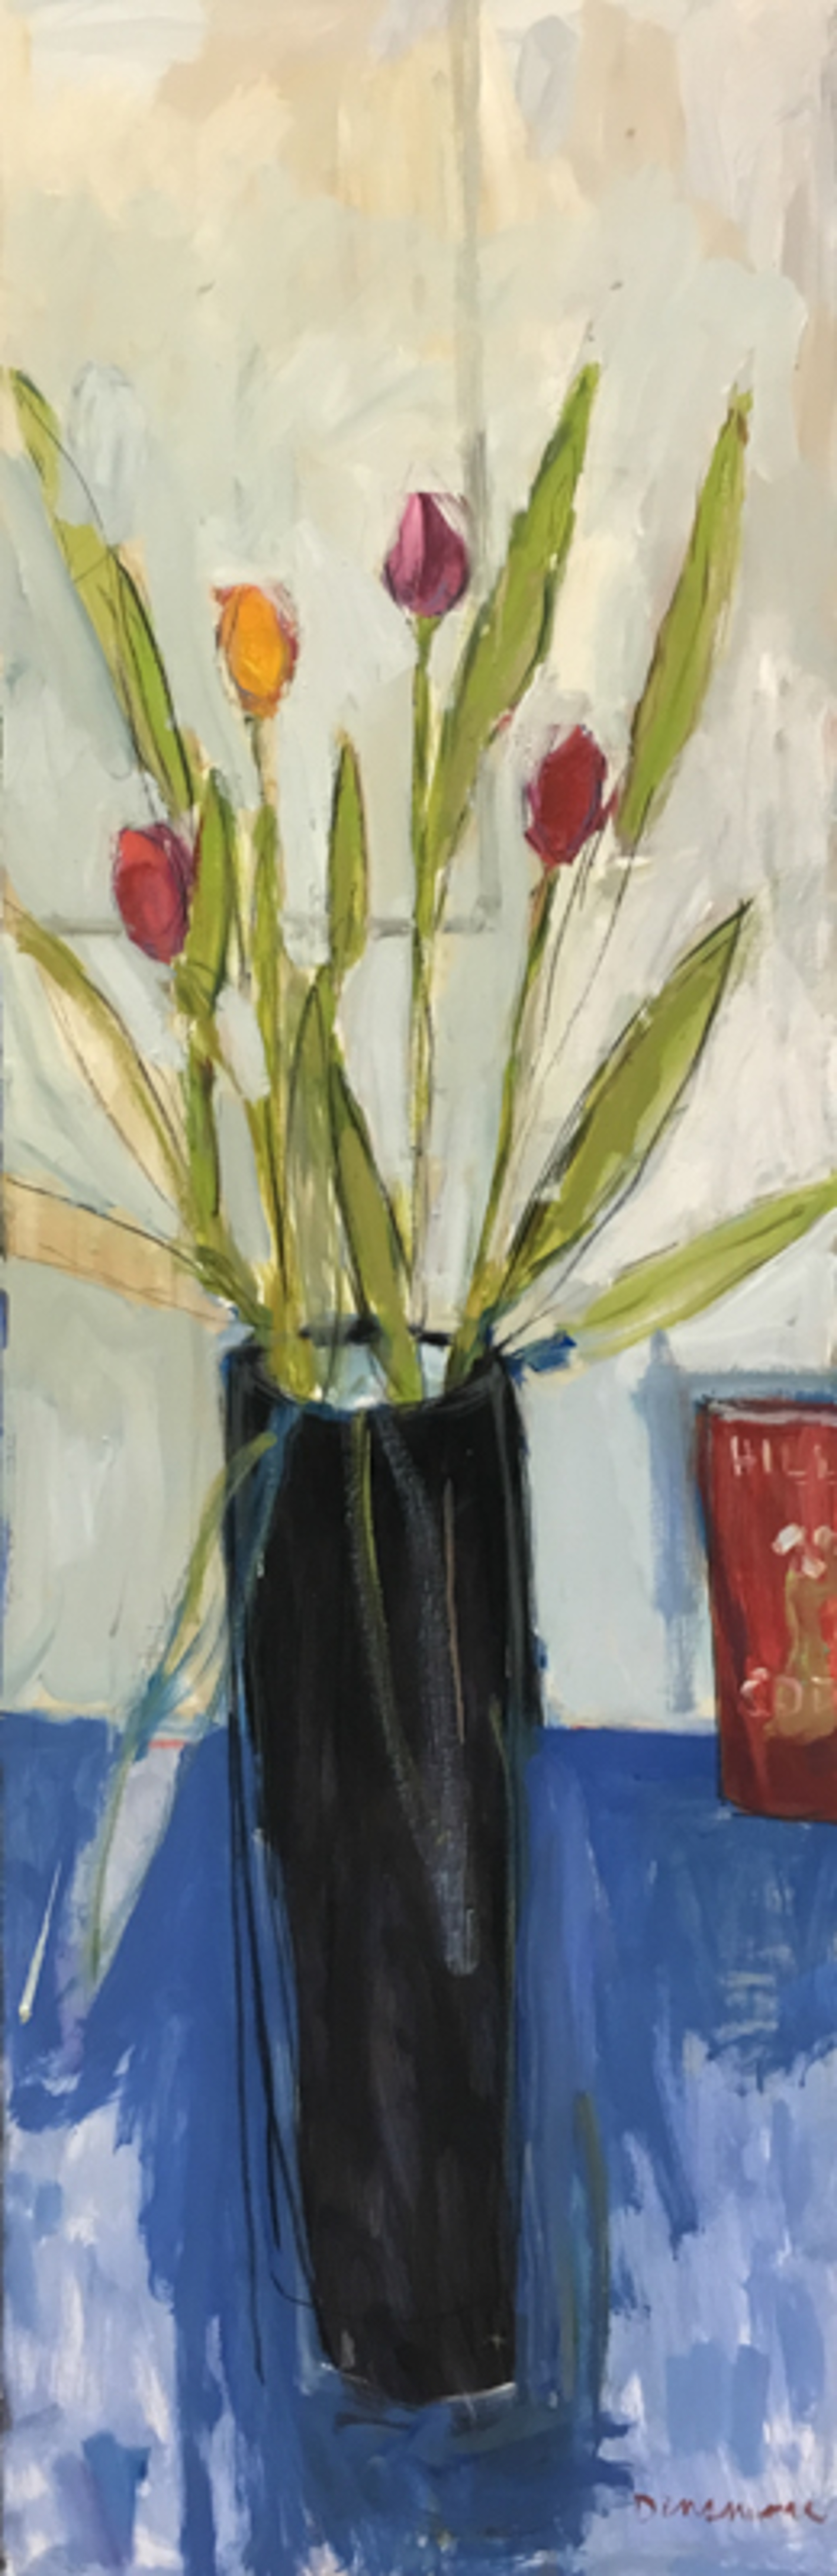 Still Life with Tulips by Stephen Dinsmore